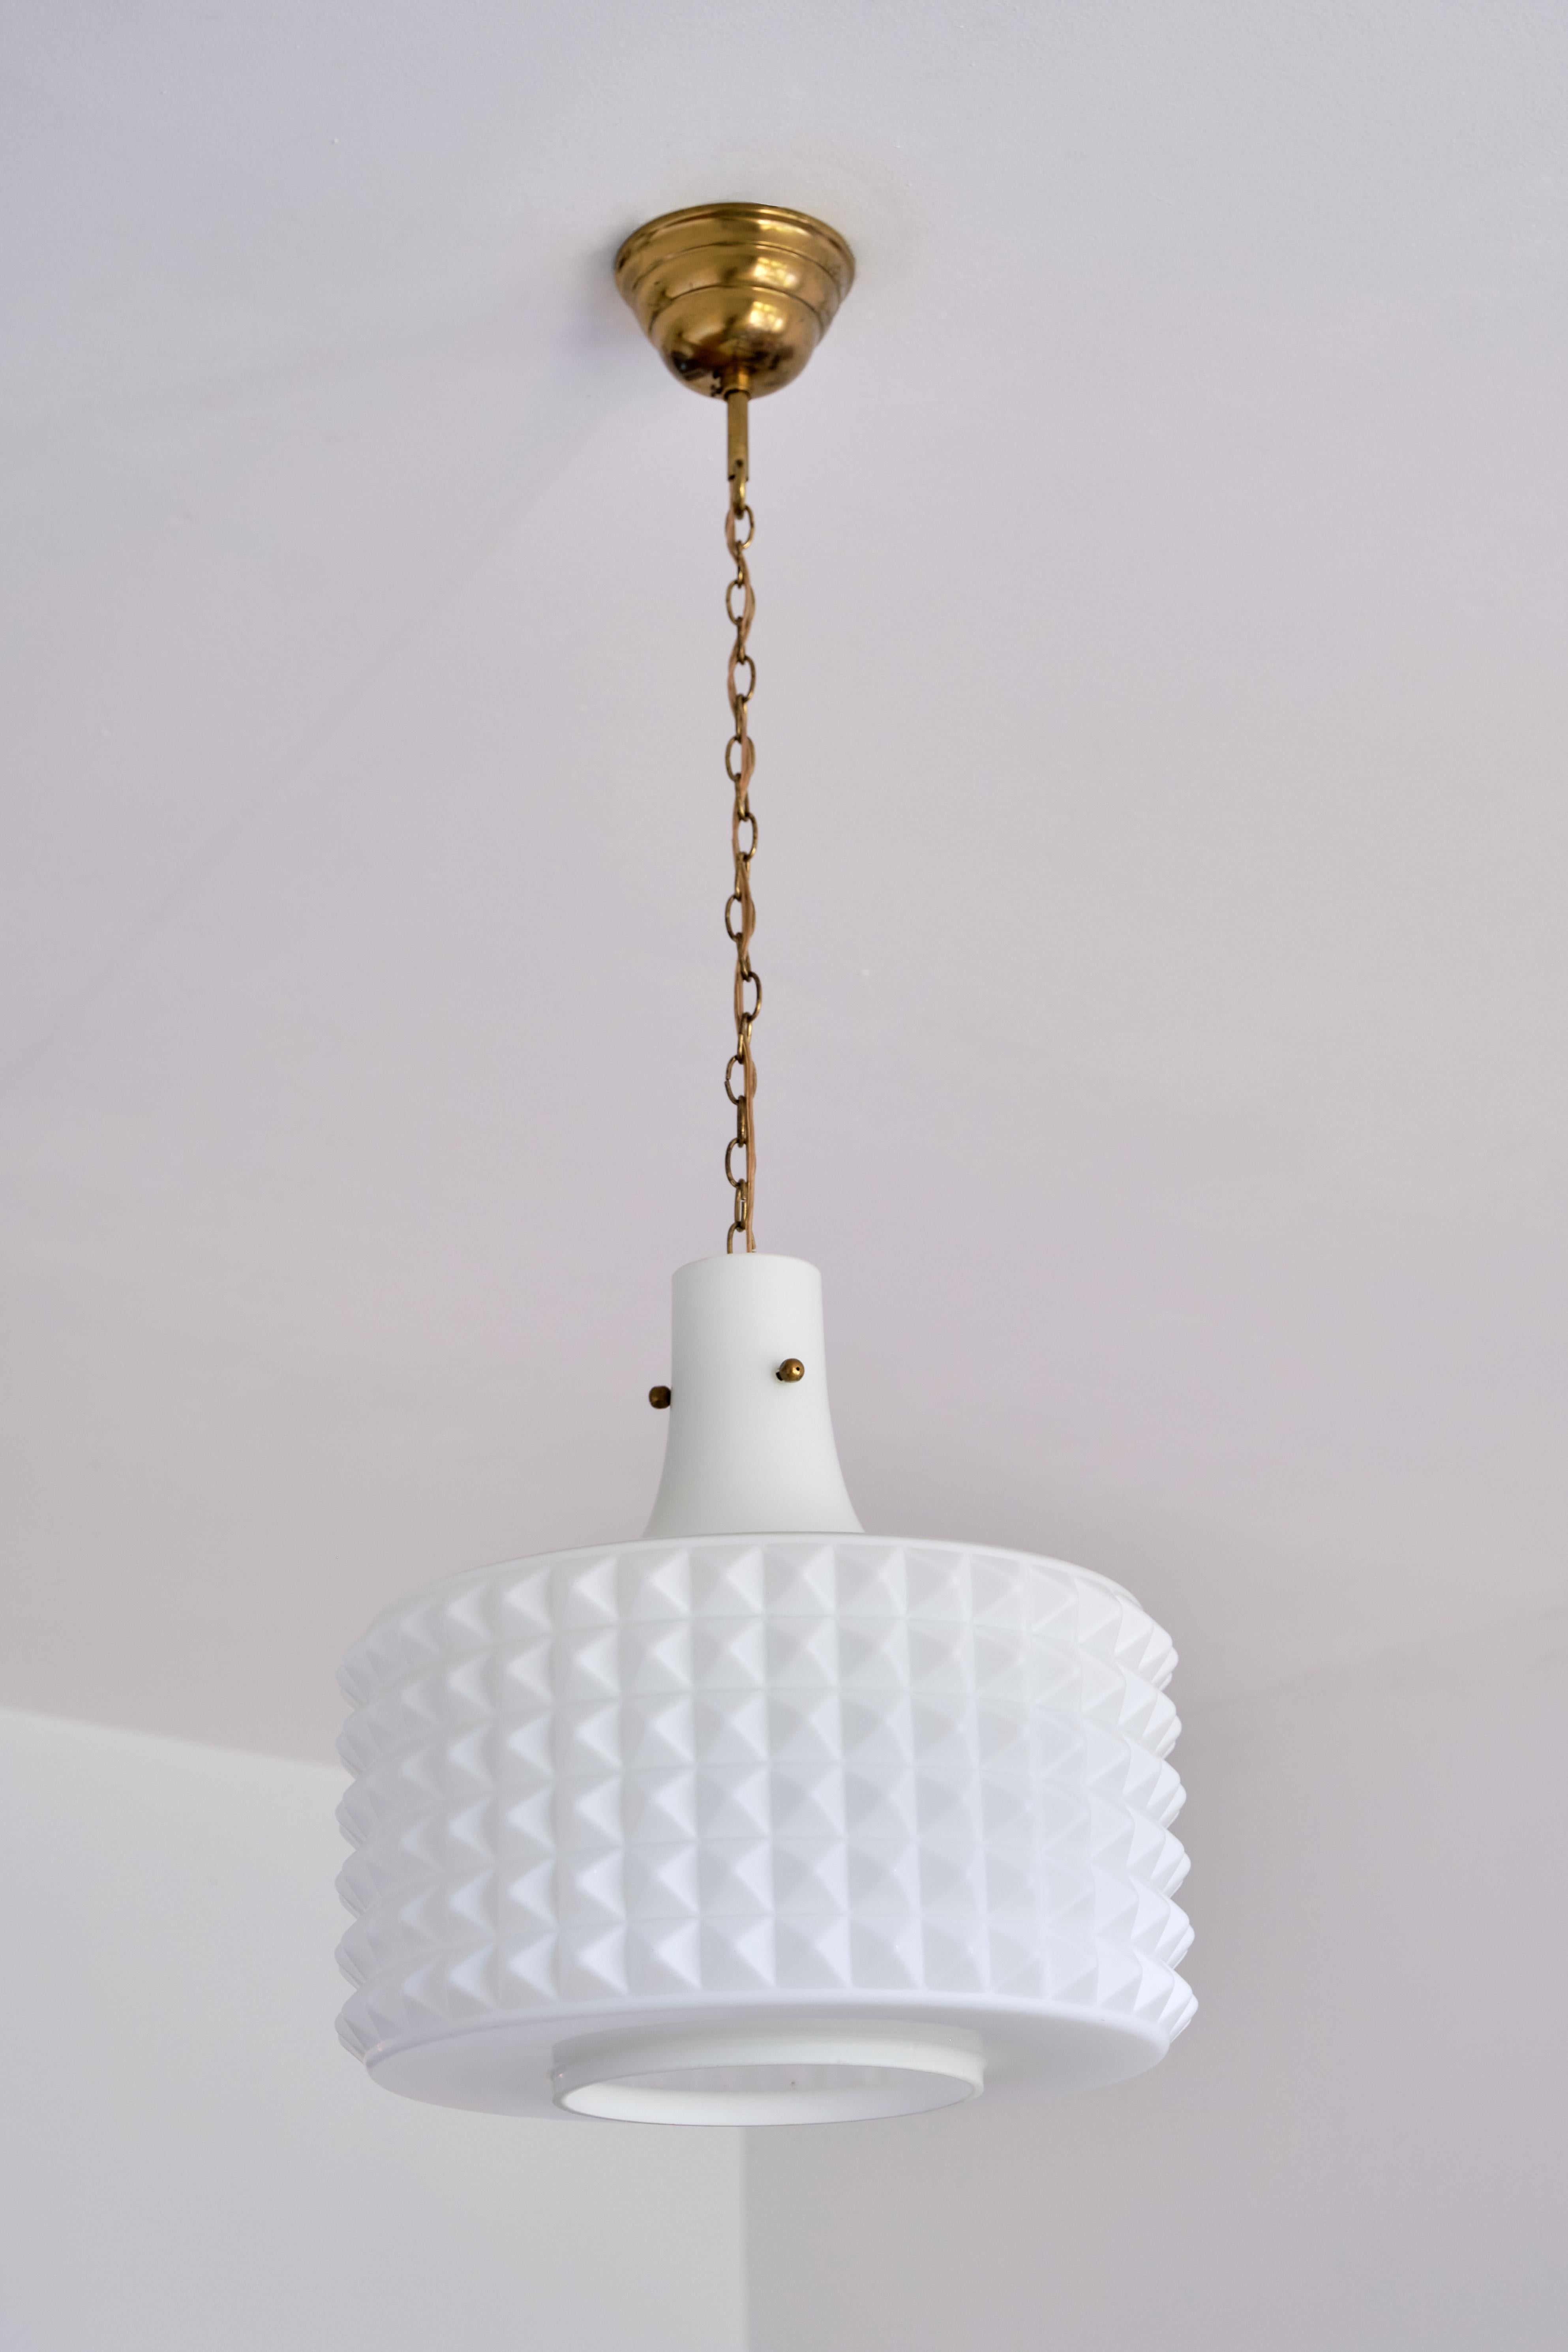 This sculptural modernist pendant lamp was produced in Orrefors, Sweden in the 1950s. The shade is made of a matte white opaline glass. The three-dimensional studded pattern in the glass gives the shade a beautiful and interesting texture, both when